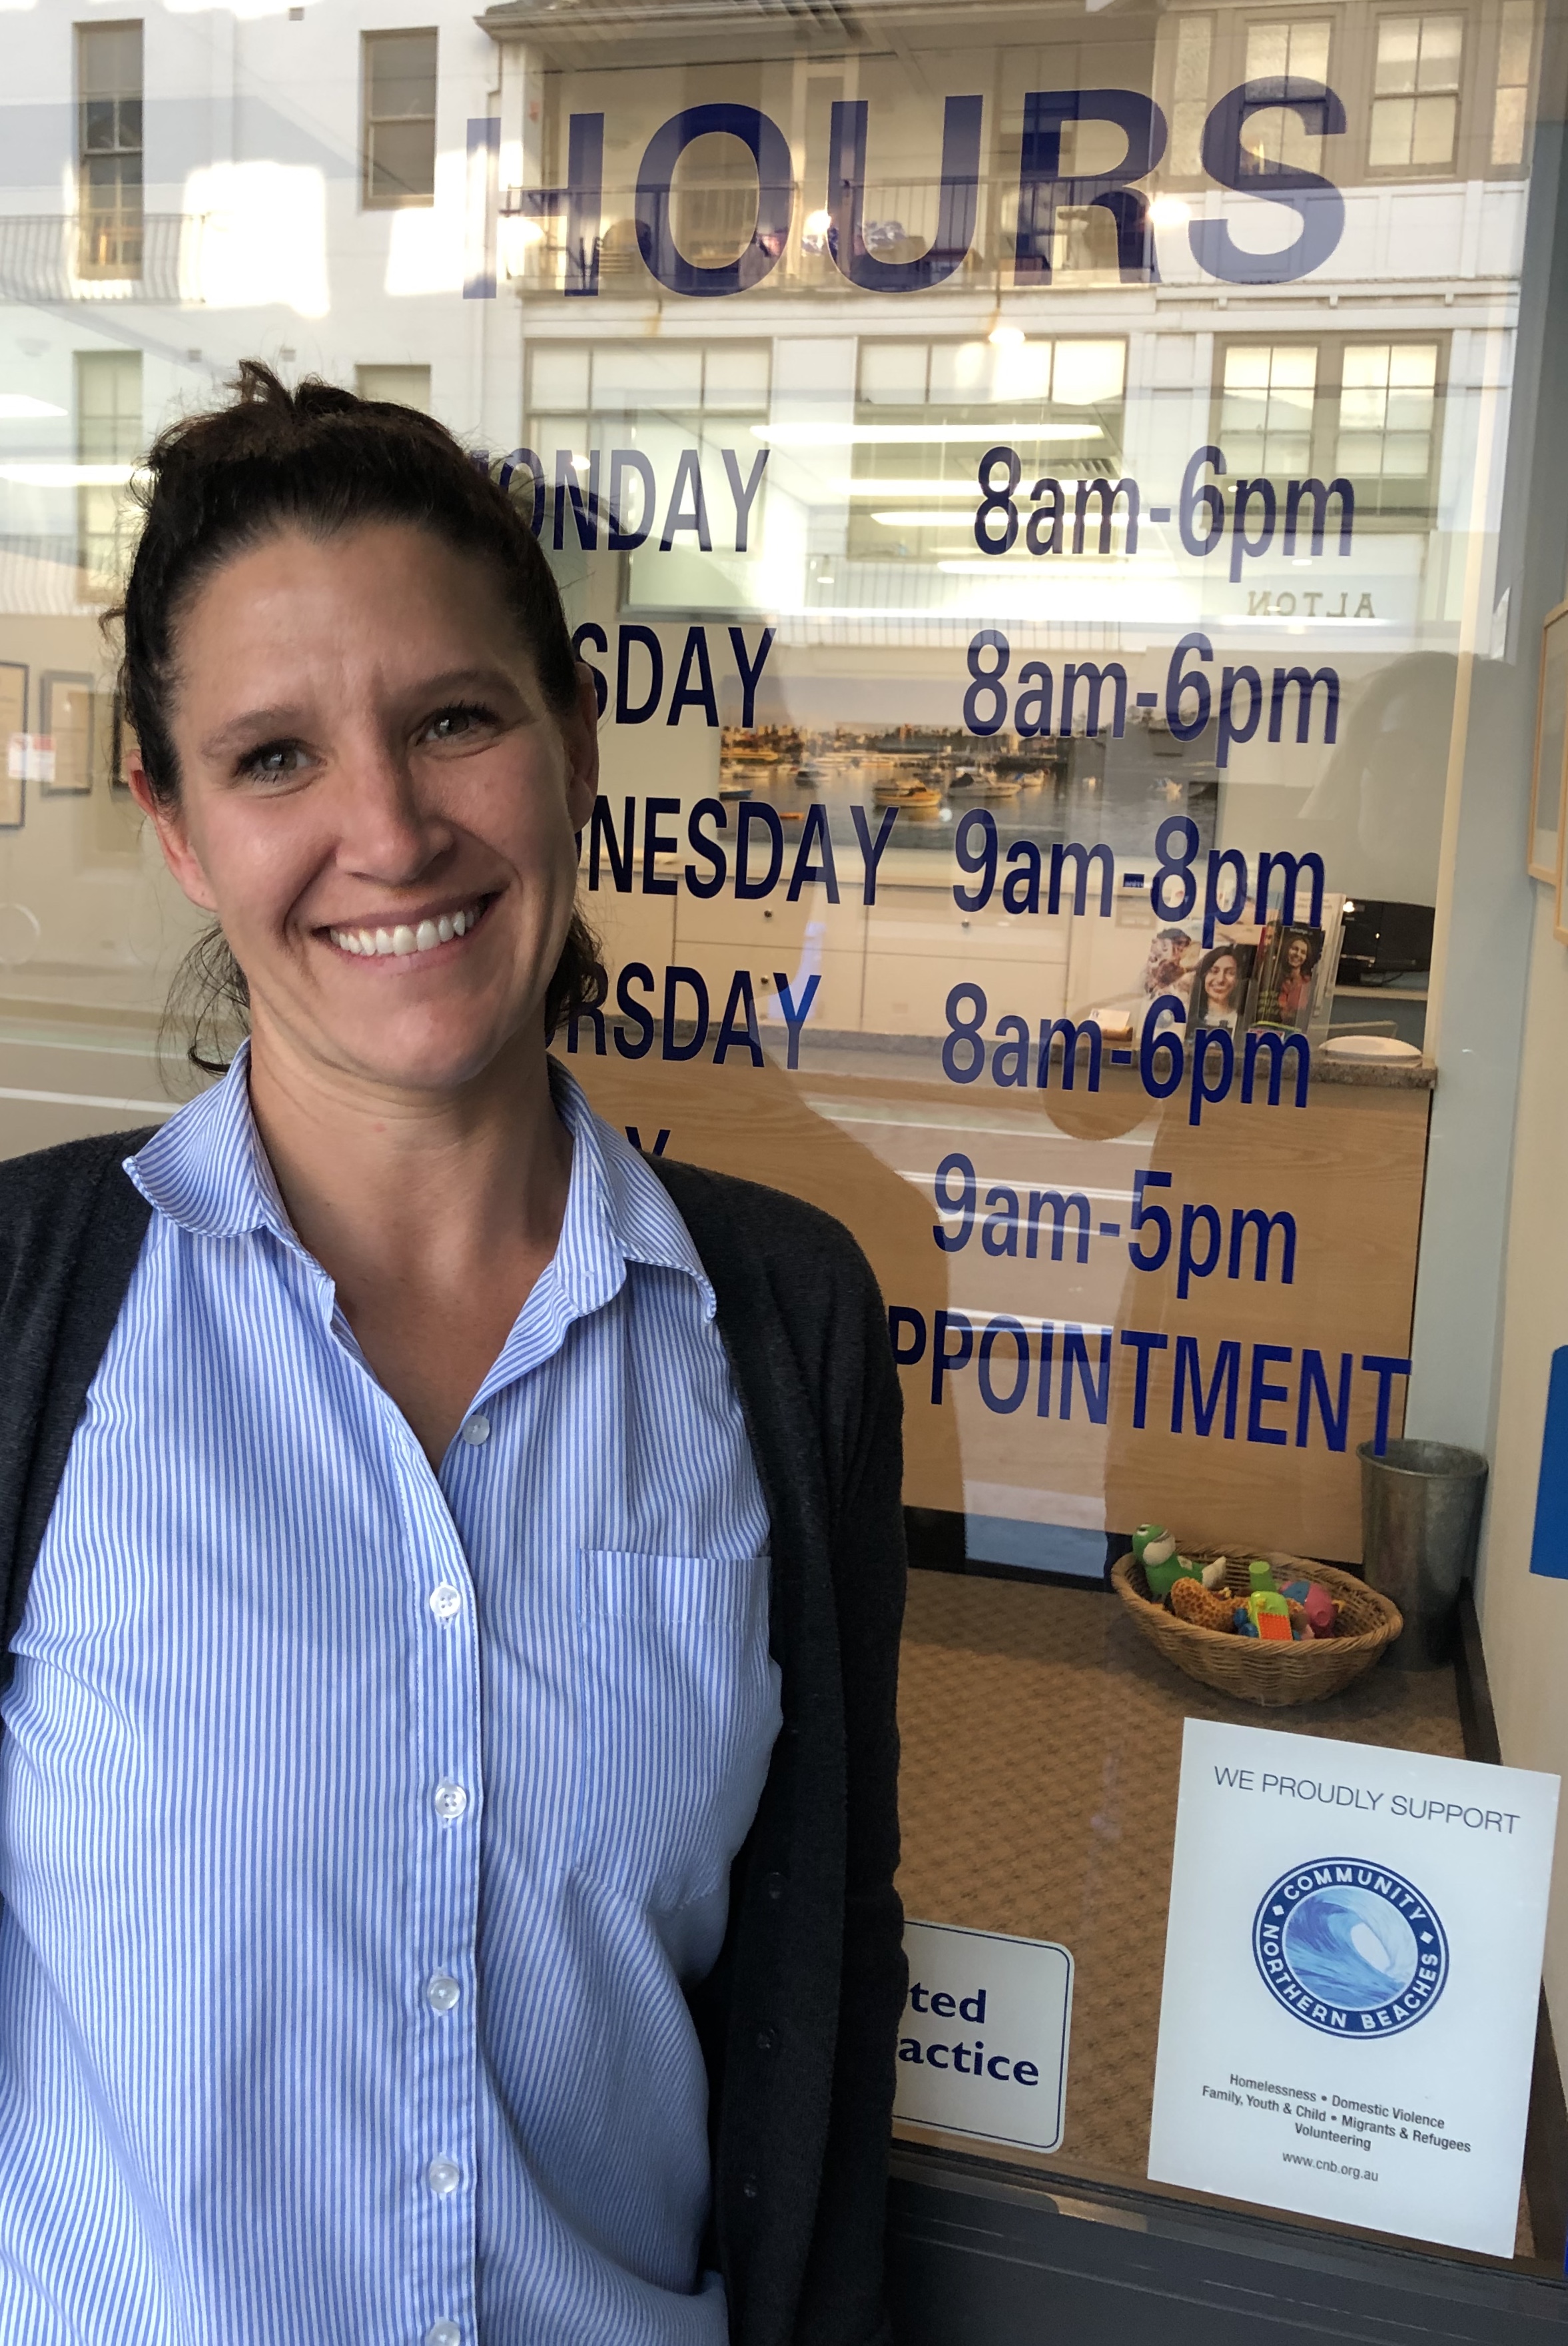 GEOFF THOMAS DENTAL Here's Courtney from Geoff Thomas Dental in Manly, who didn't hesitate when asked if we could put up our supporter sticker on their front door. Thanks to their generosity we have been able to help a couple of our clients survivinâ€¦